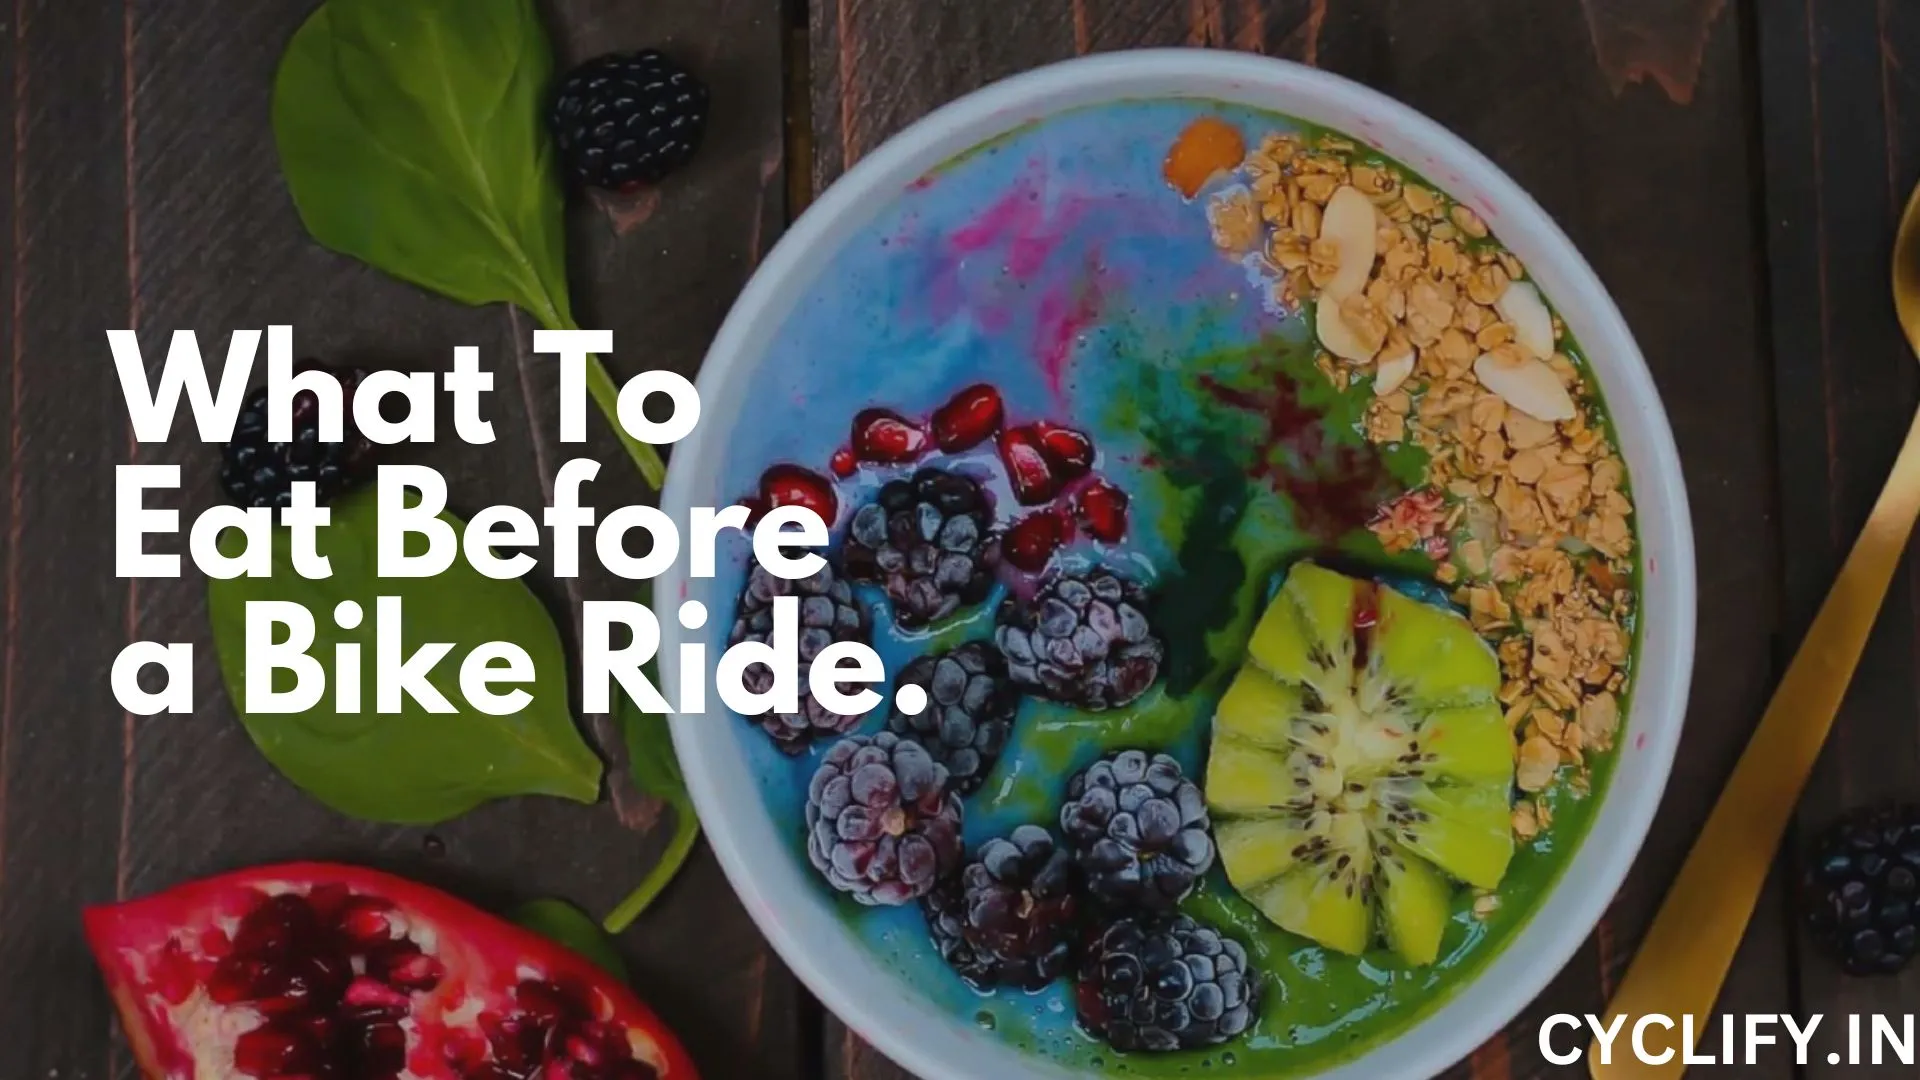 What to eat before a bike ride - A smoothie bowl dressed with fruits & nuts.